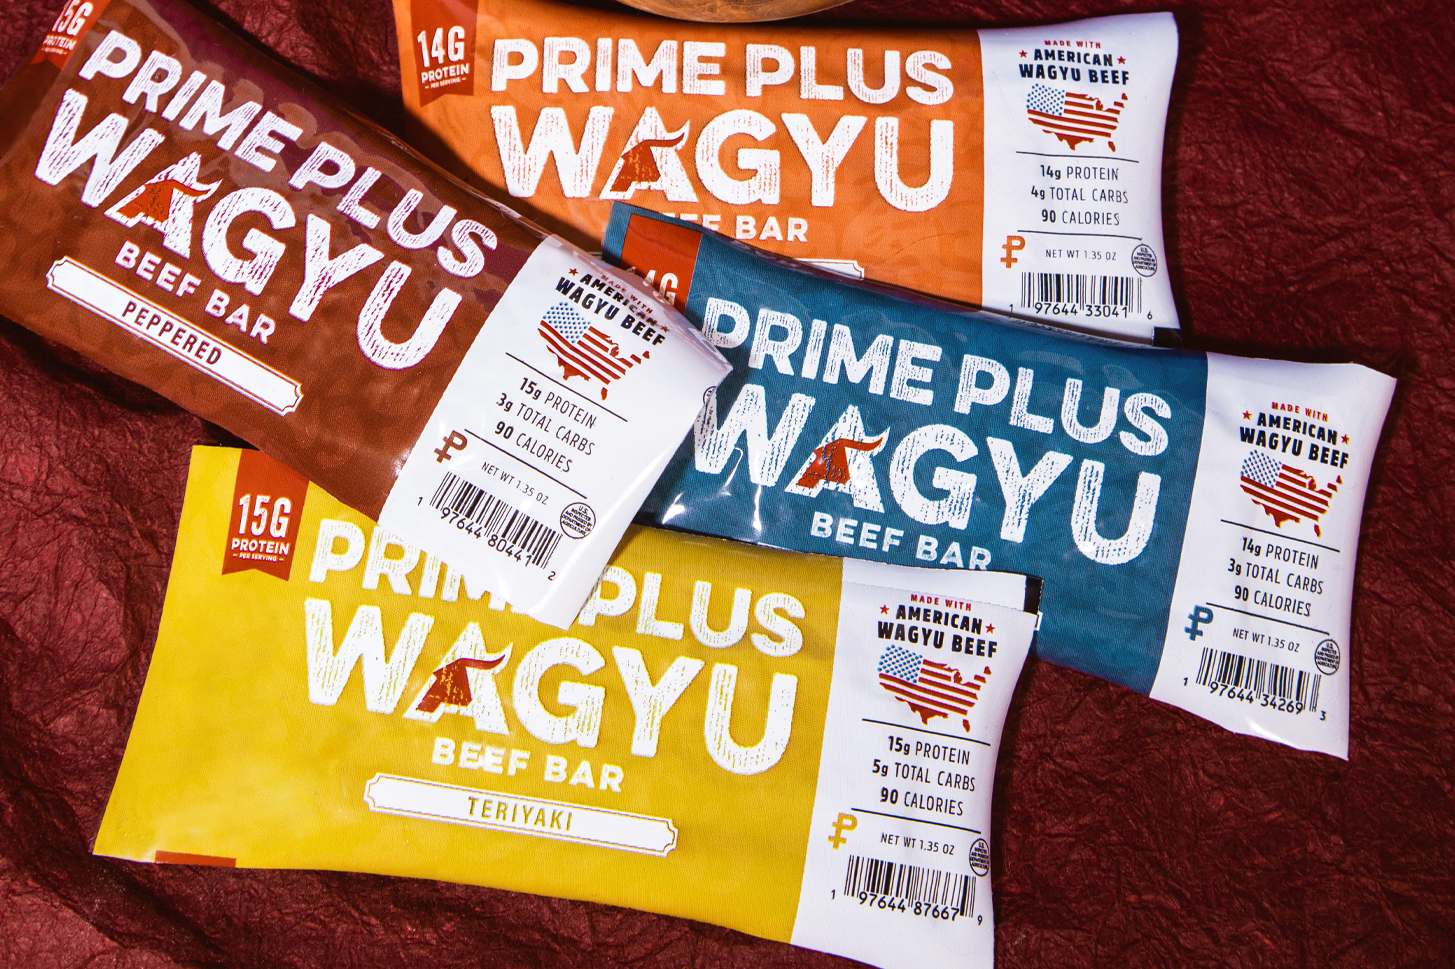 Prime Plus Wagyu - Variety Box (12 Count)